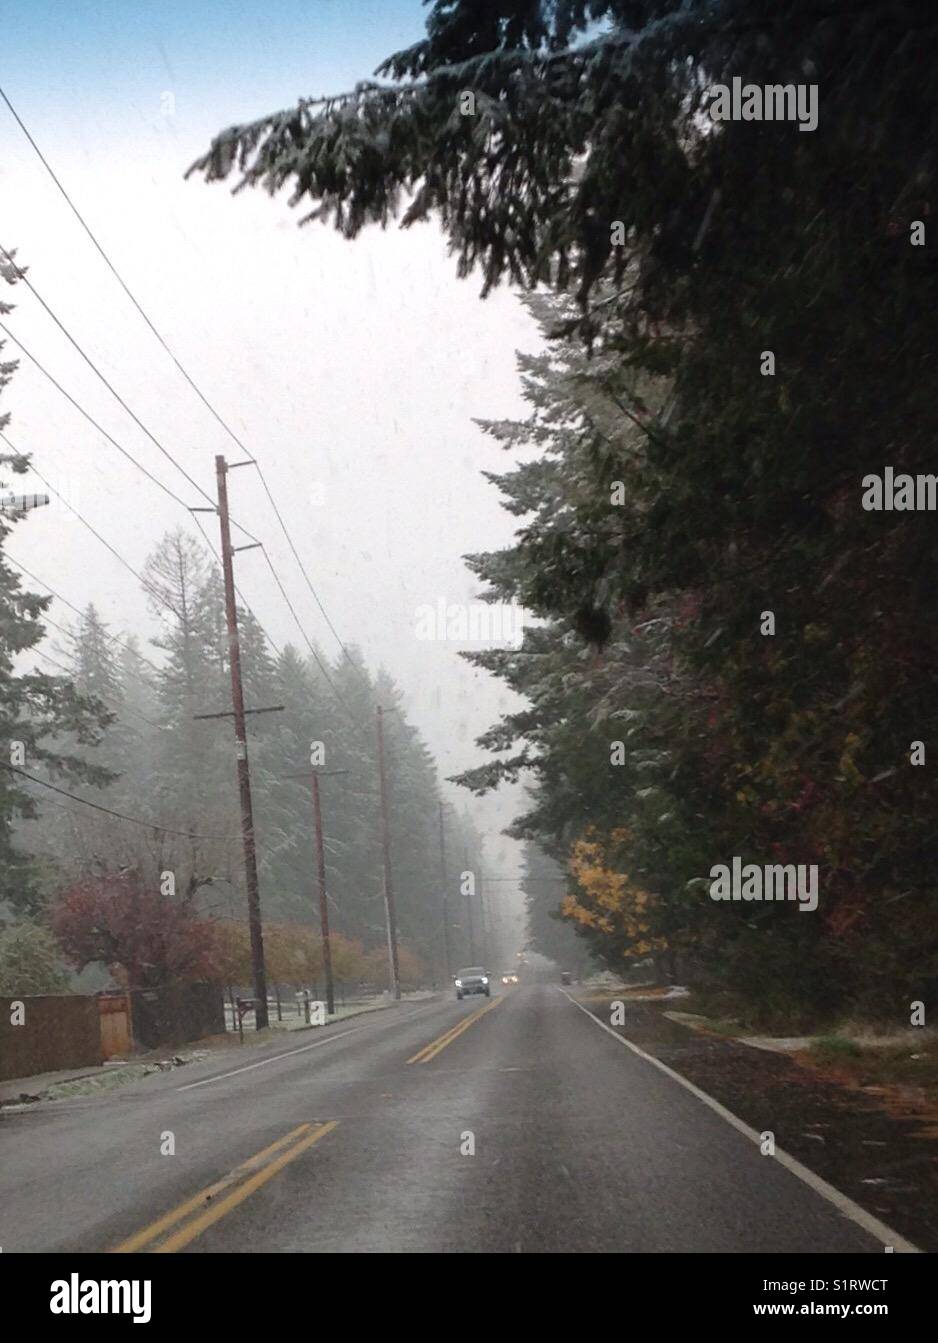 Poor visibility on a rural road in Washington State. Wet, snowy. Stock Photo